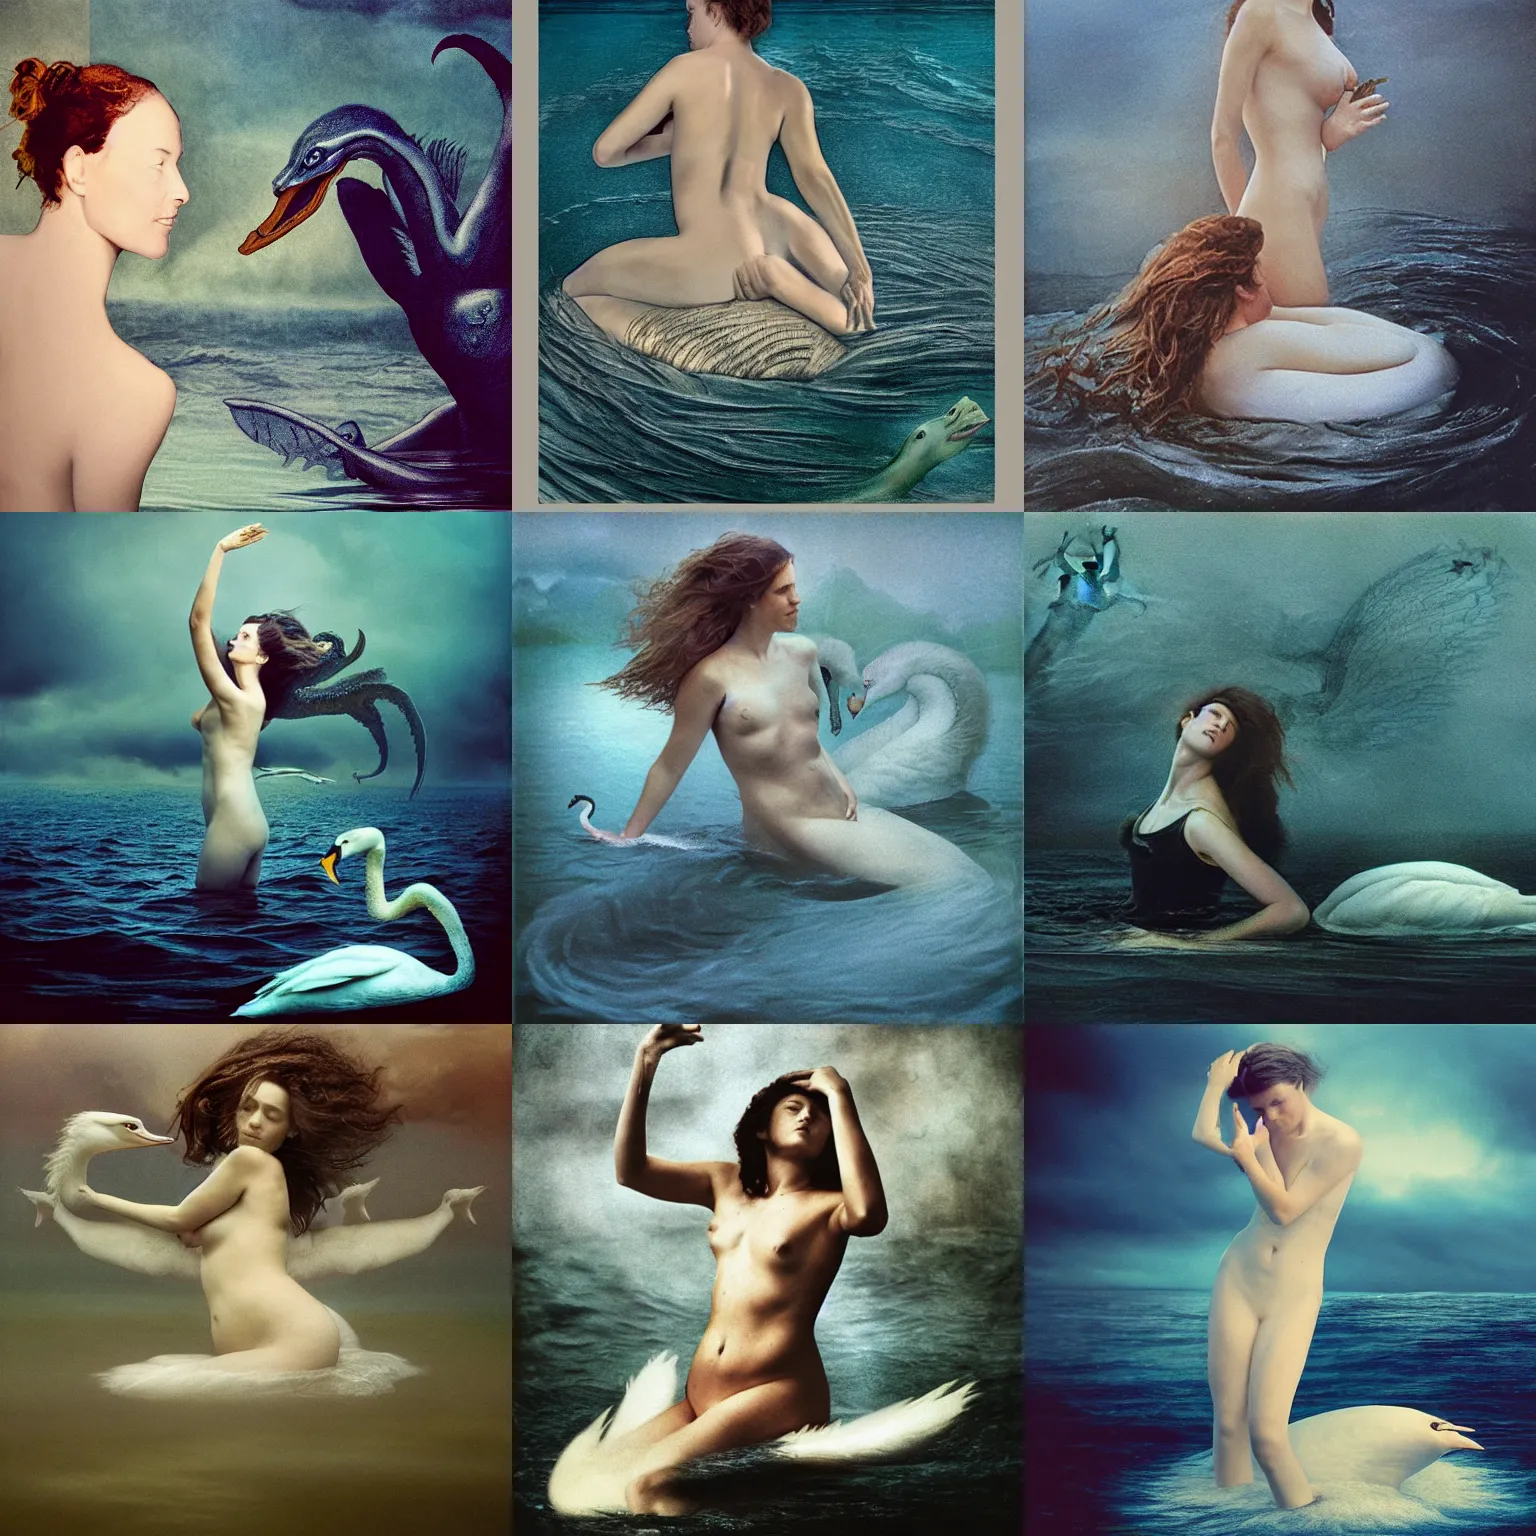 Prompt: Picture of a woman and a sea monster by Annie Leibovitz in the style of Leda and the Swan.